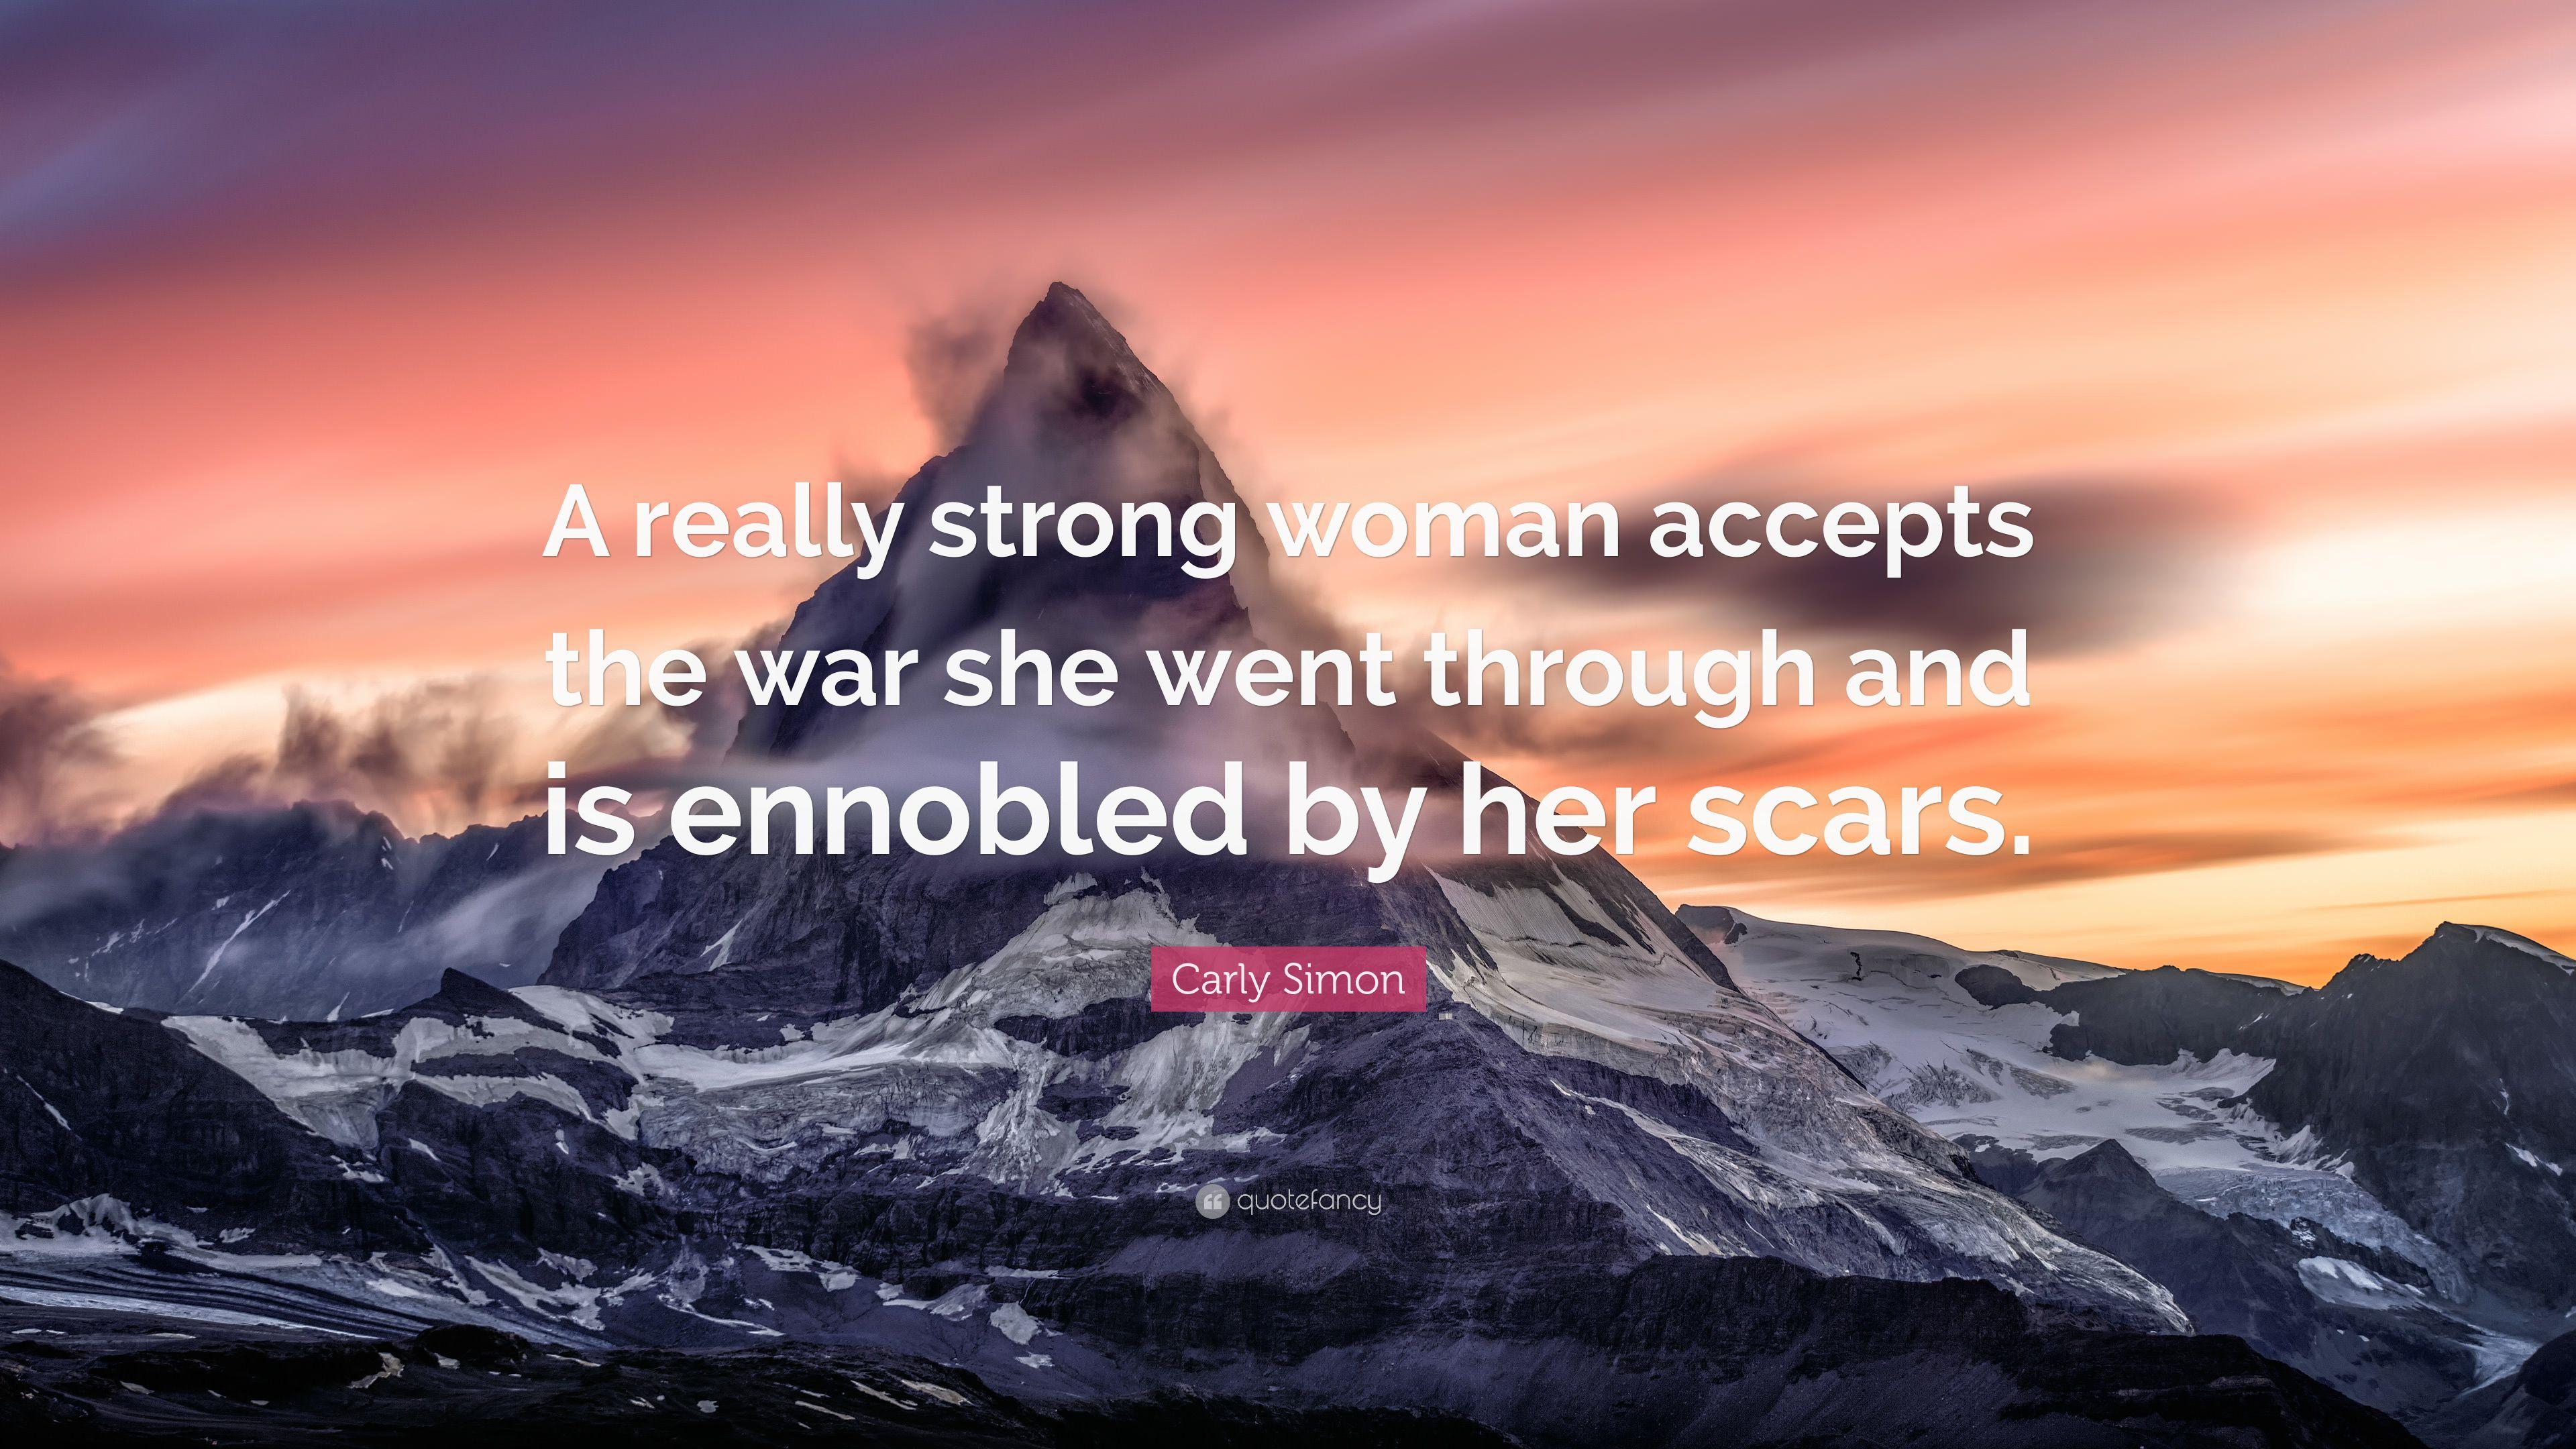 Carly Simon Quote: “A really strong woman accepts the war she went